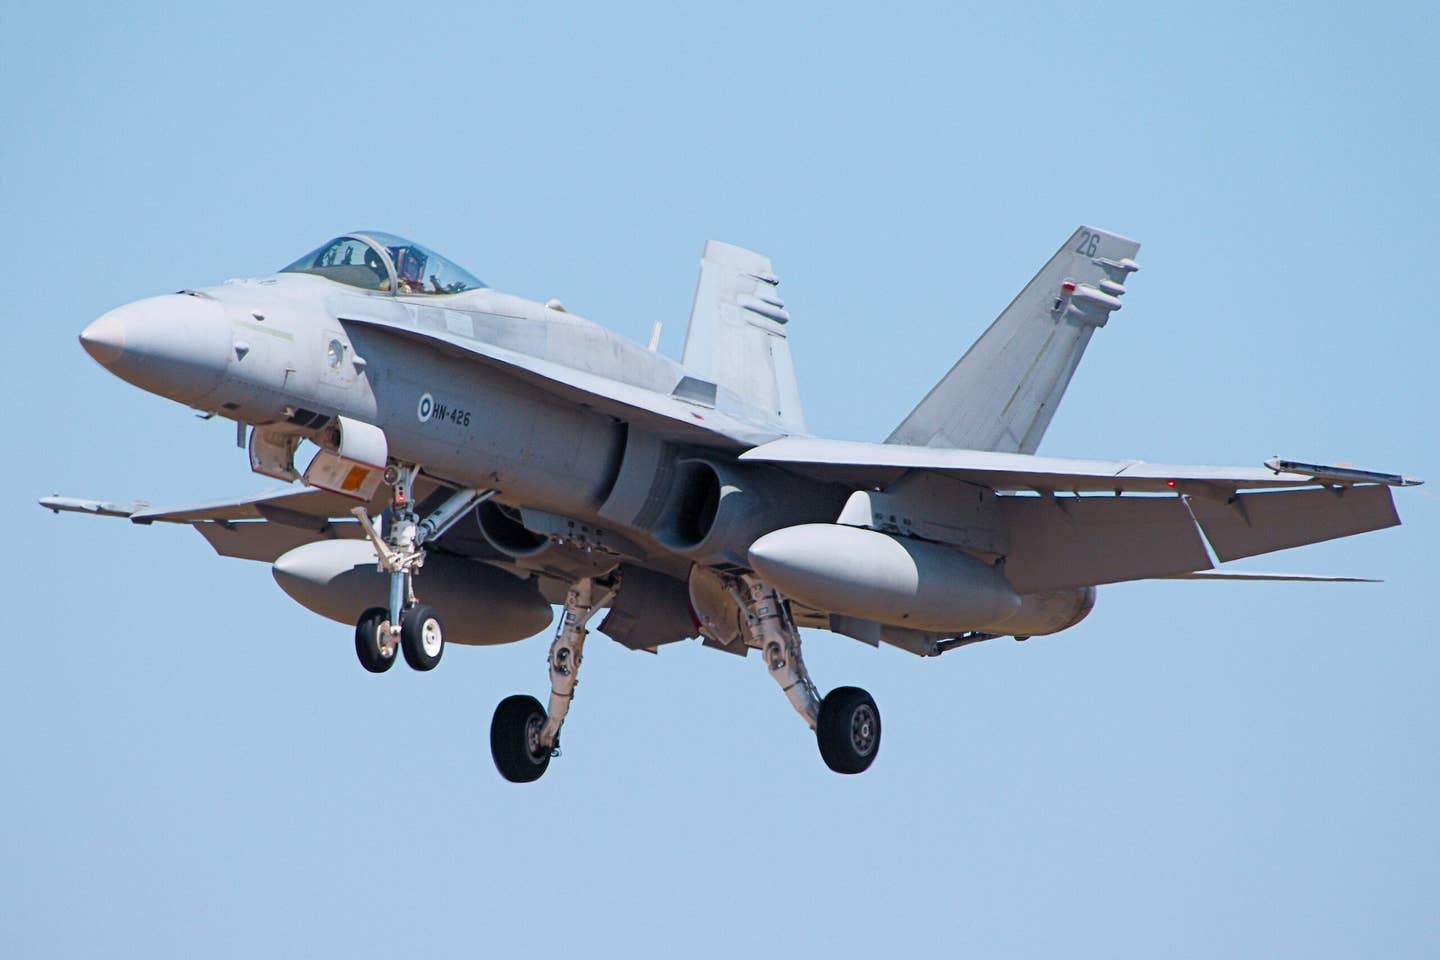 Finnish Air Force F/A-18 Hornet, pictured on August 17, 2018. <em>Airwolfhound via Getty Images</em>